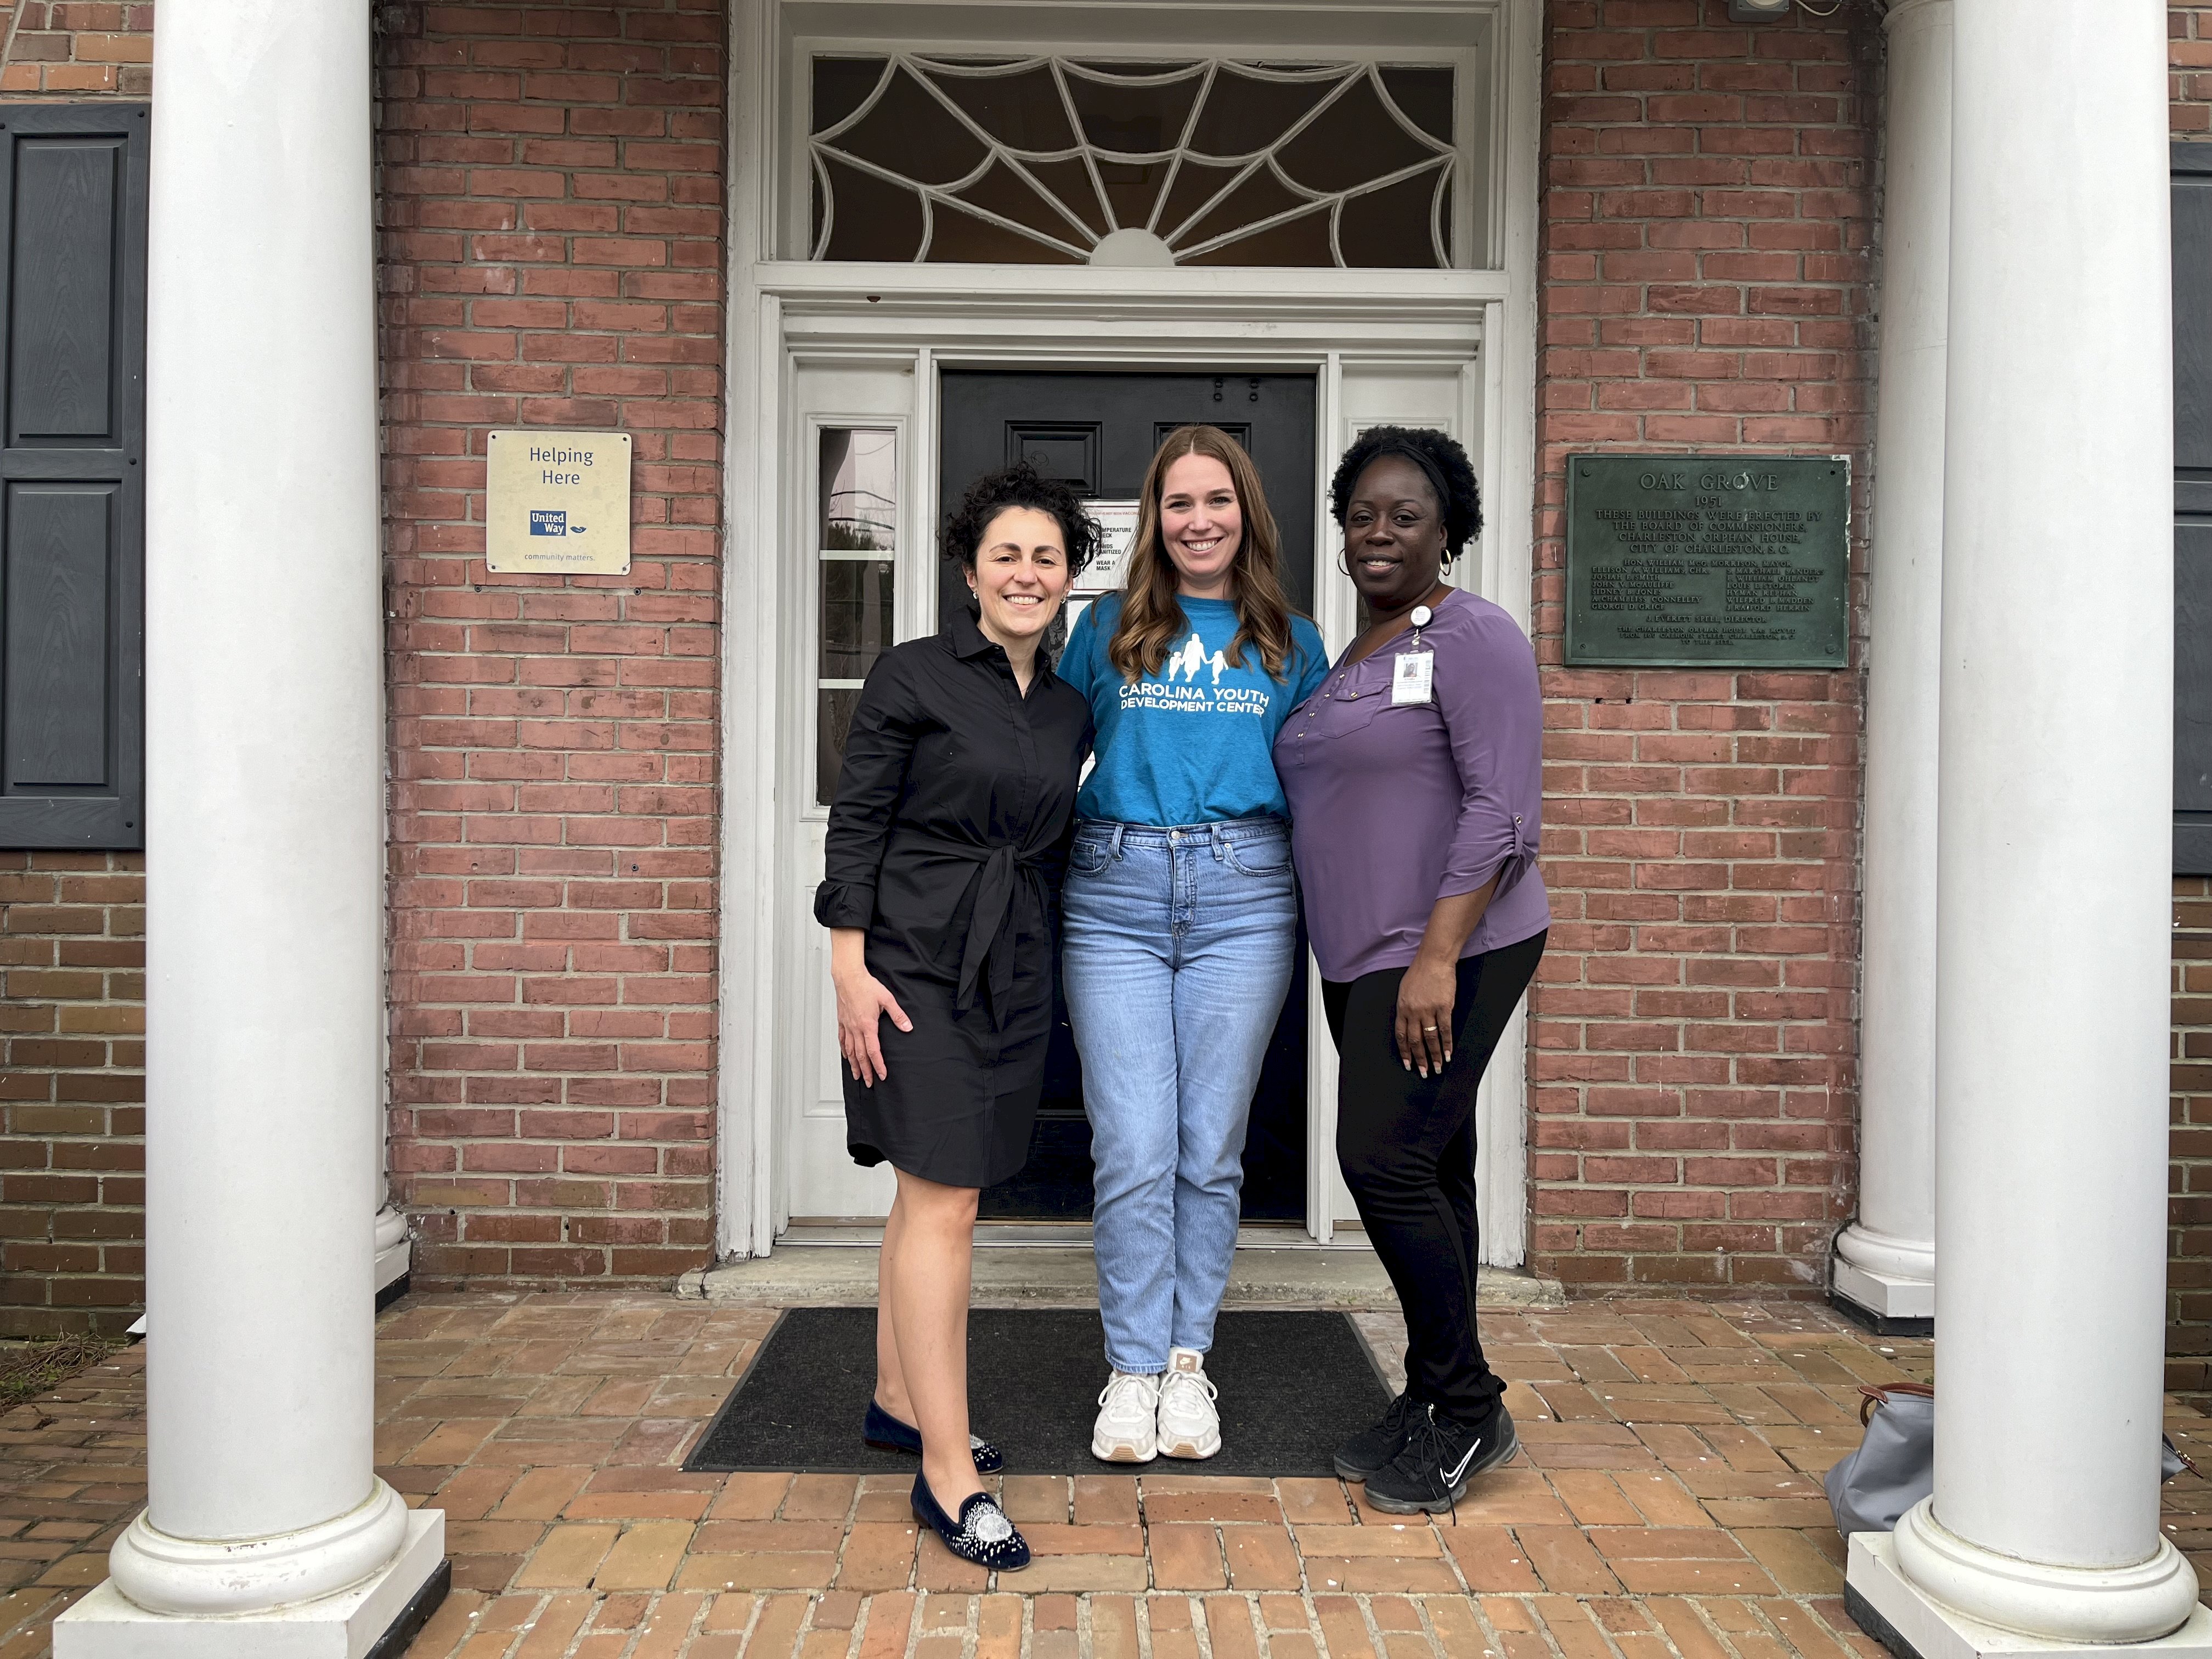 Photo shows three people in front of a grant front entrance to an old South Carolina building - the home of the Carolina Youth Development Center